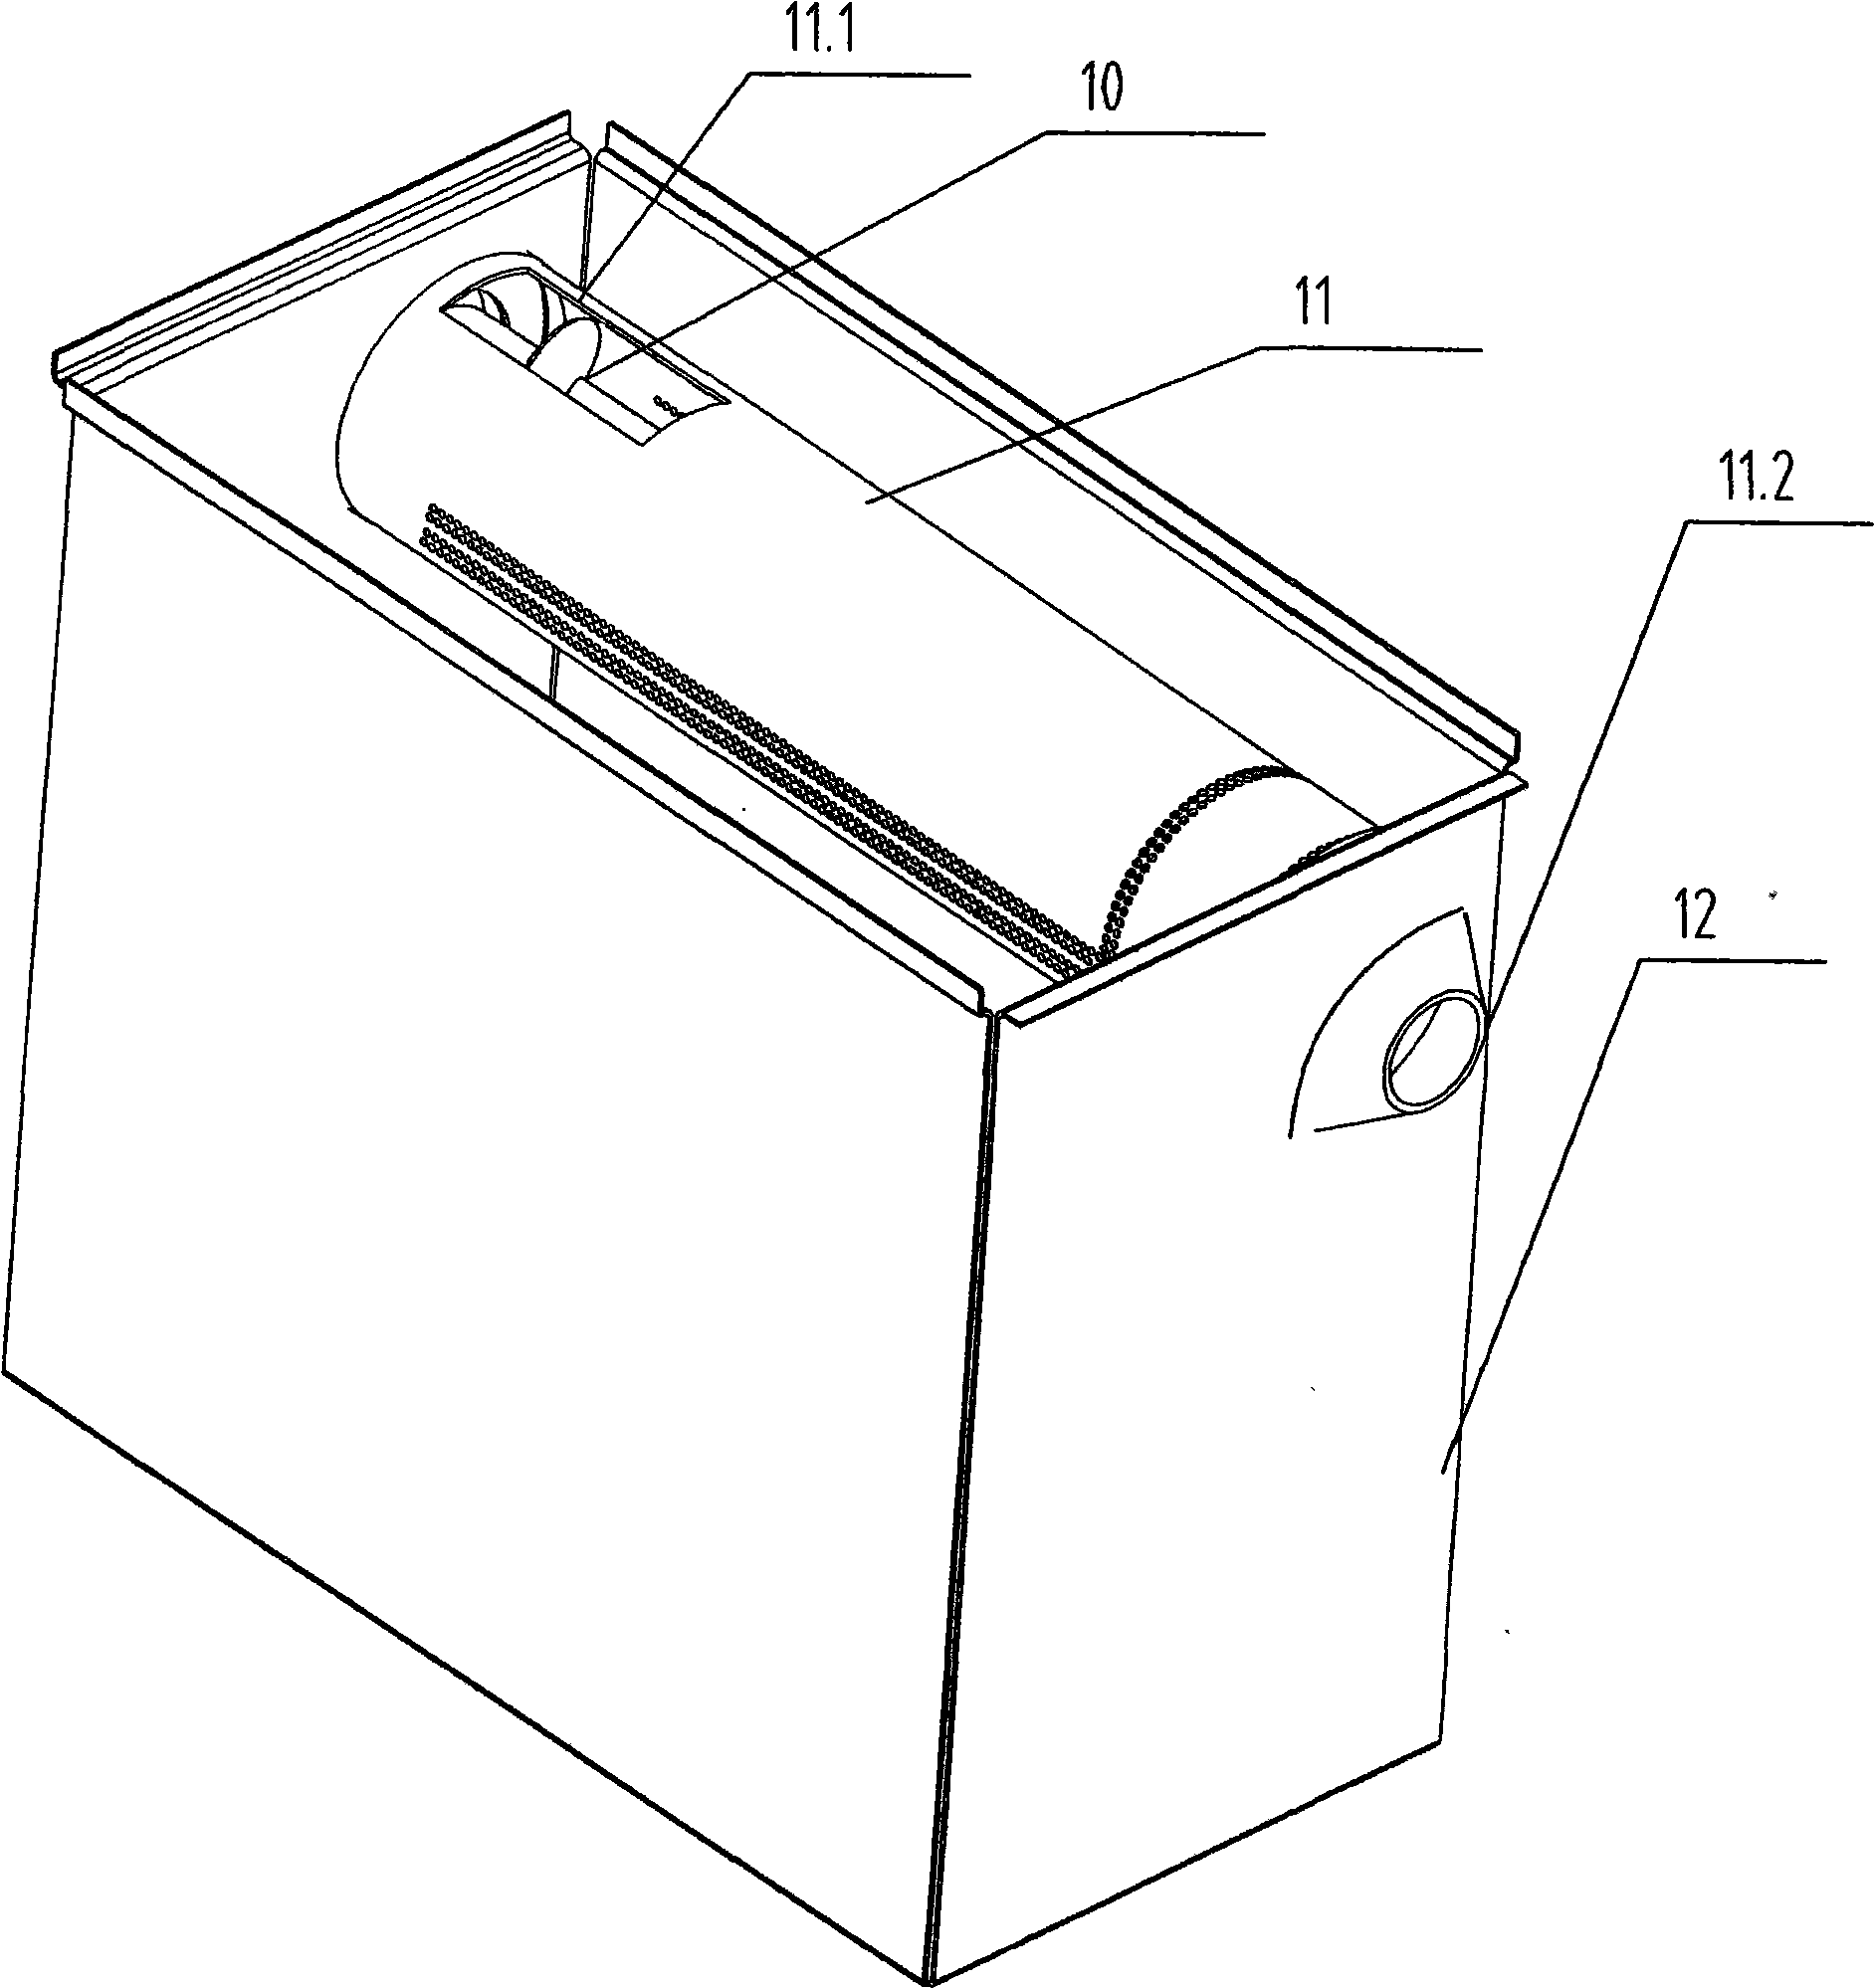 Self-cleaning dust filter